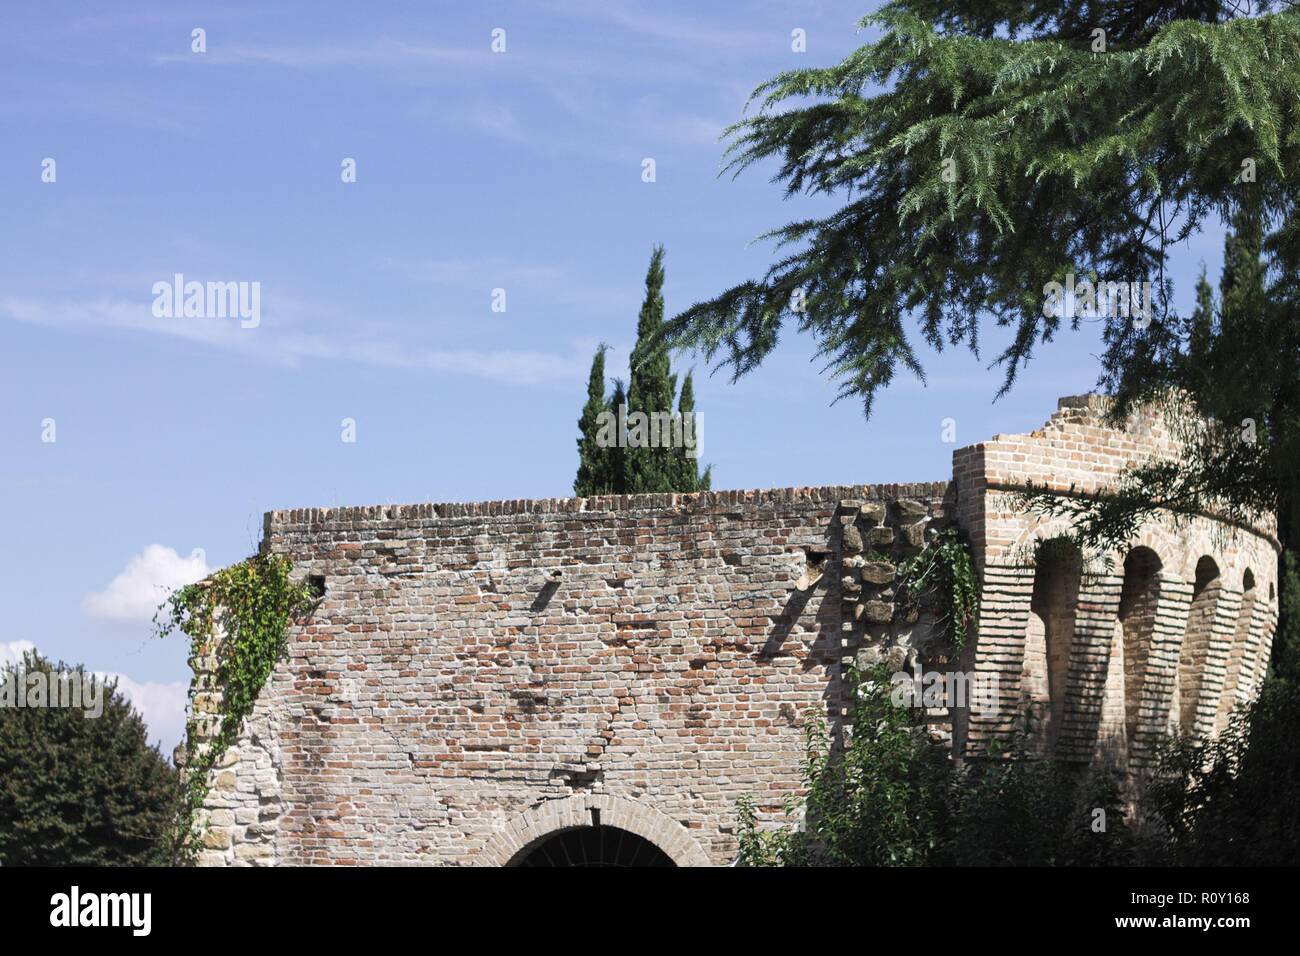 Ruins of a tower in Tolentino (Marche, Italy, Europe) Stock Photo